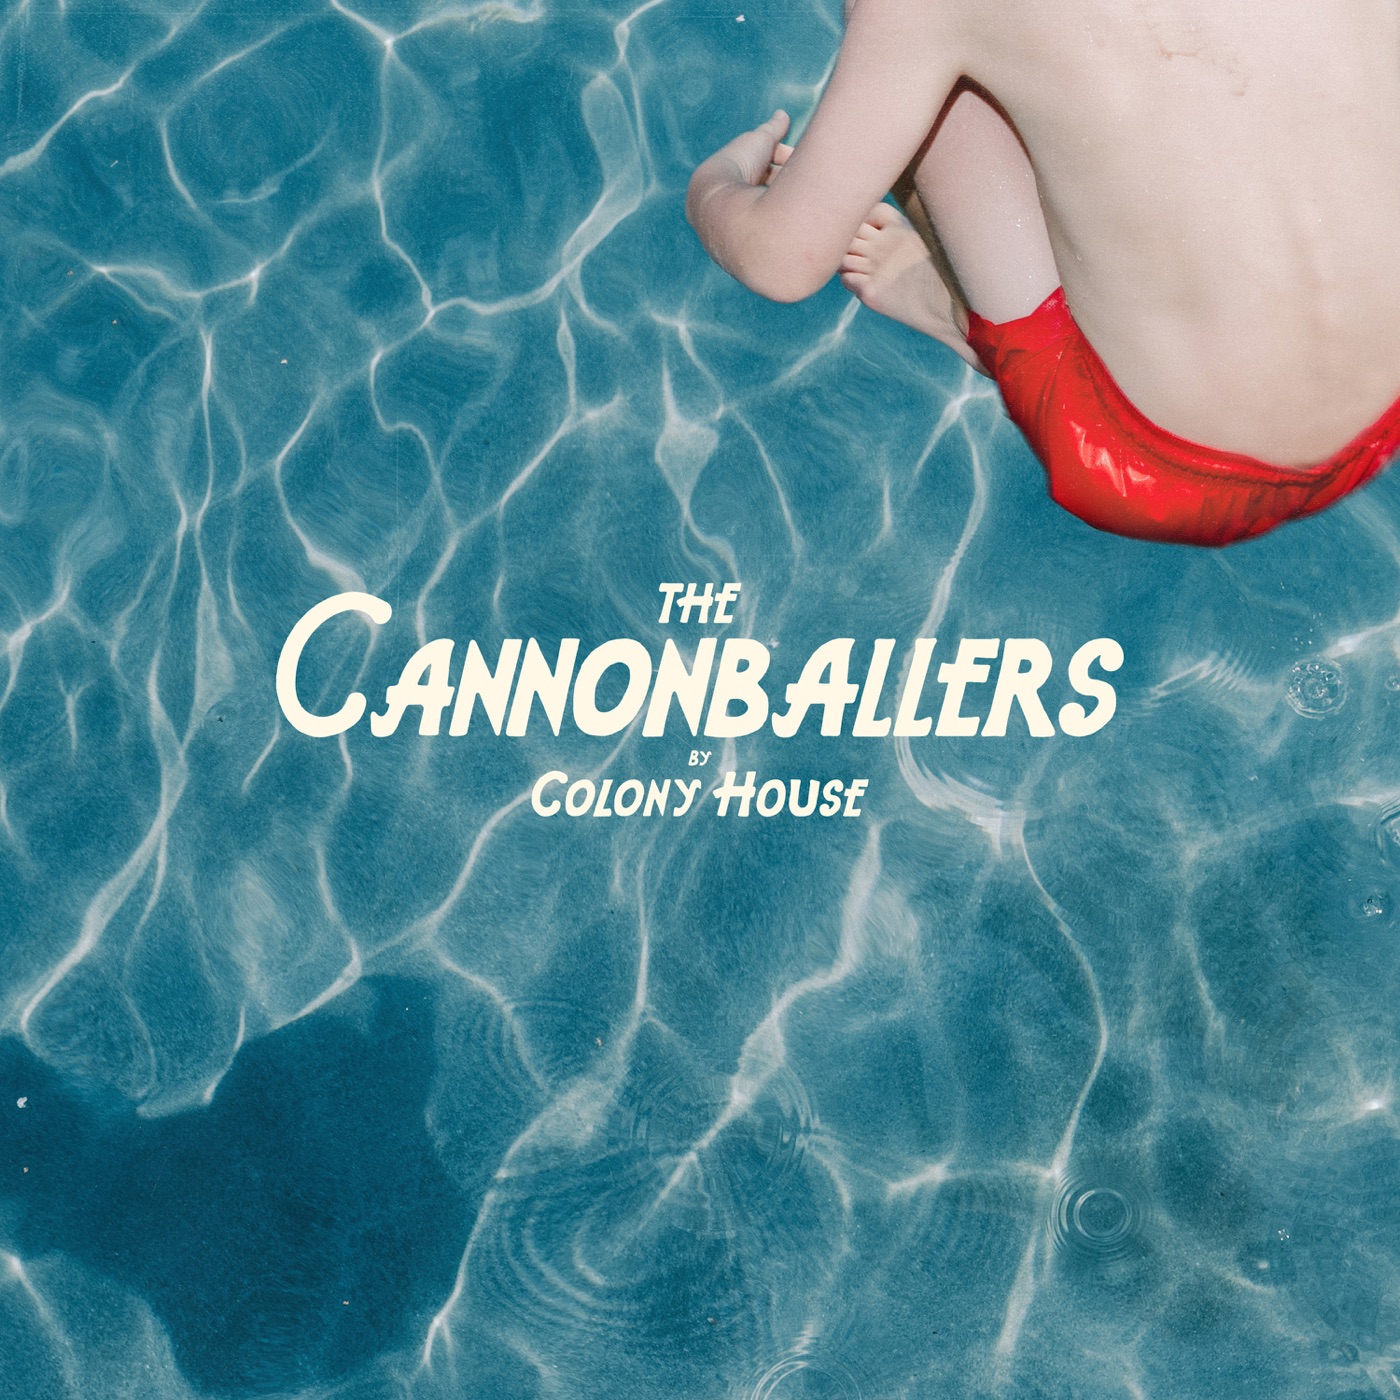 The Cannonballers by Colony House